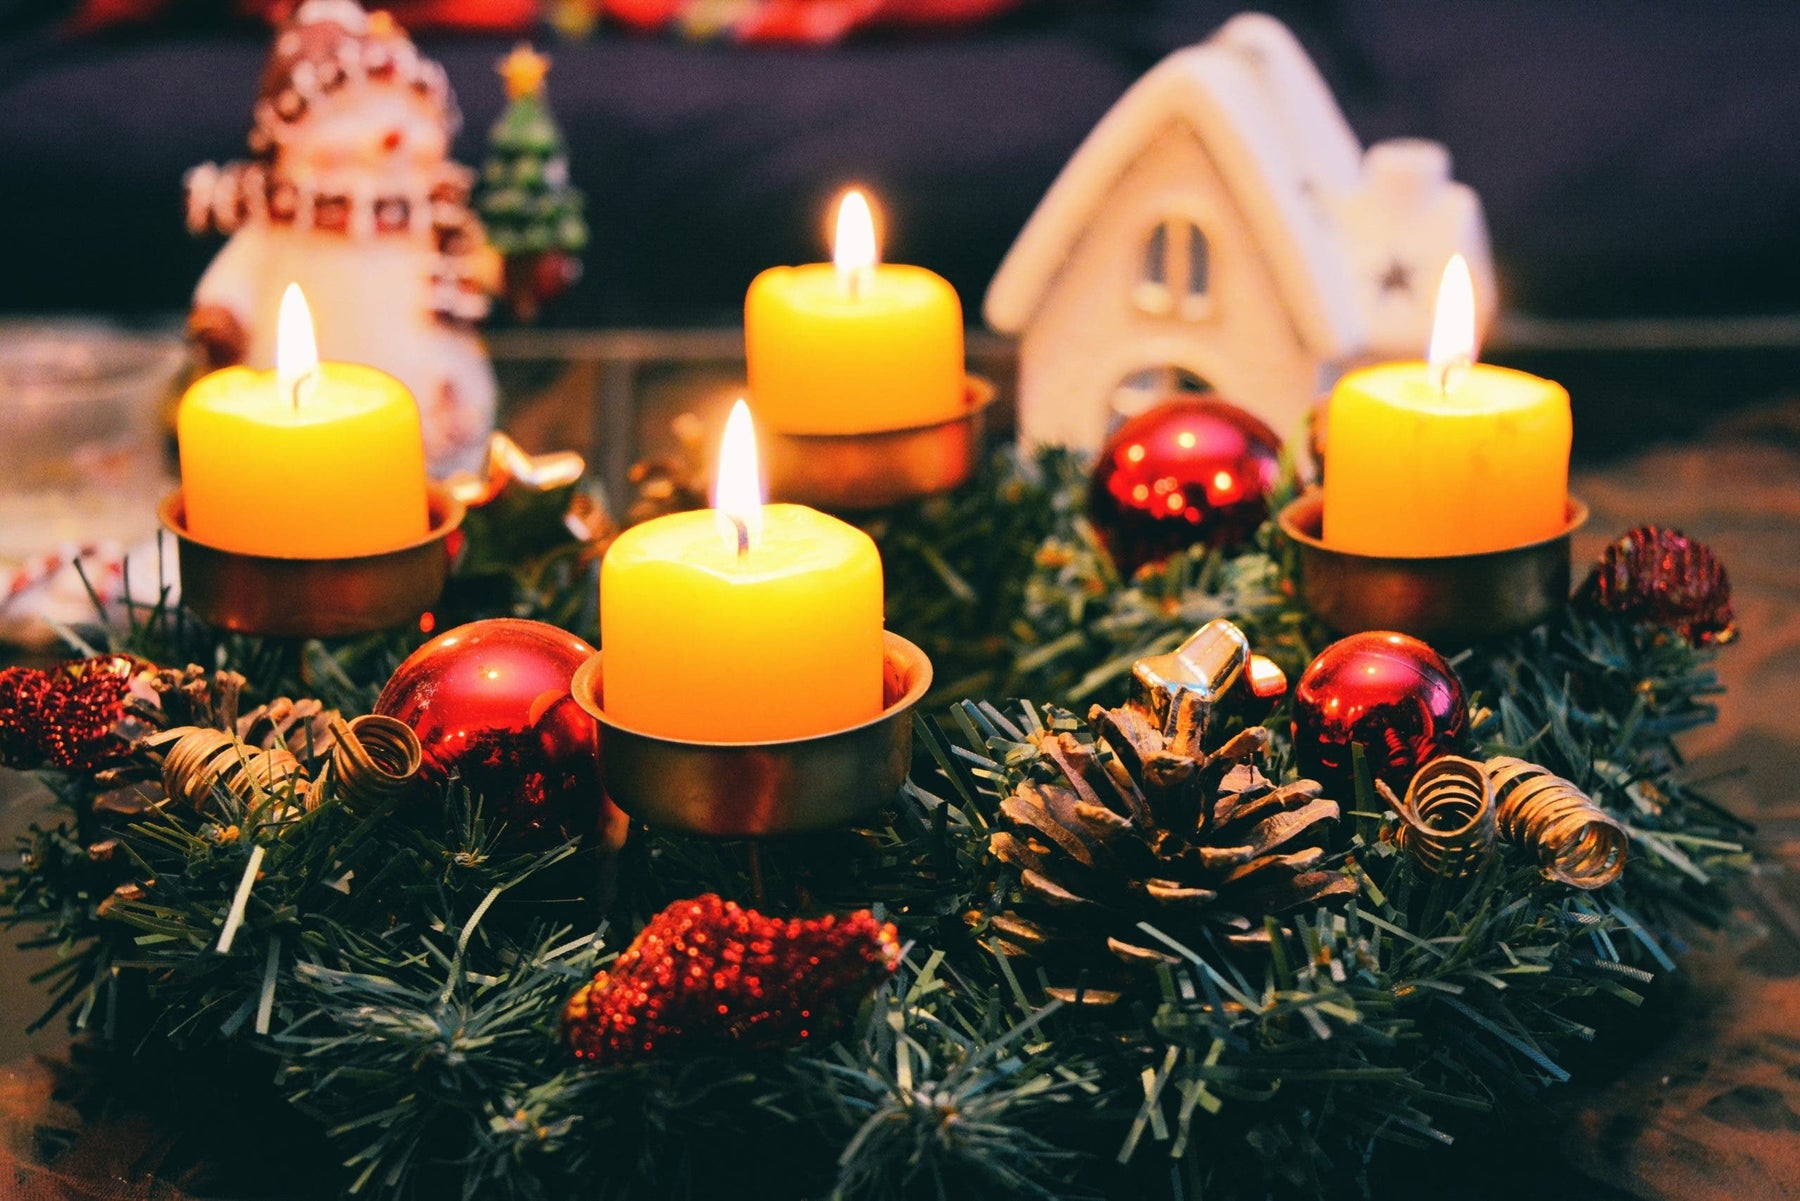 Top 5 Holiday Trends to Try This Year